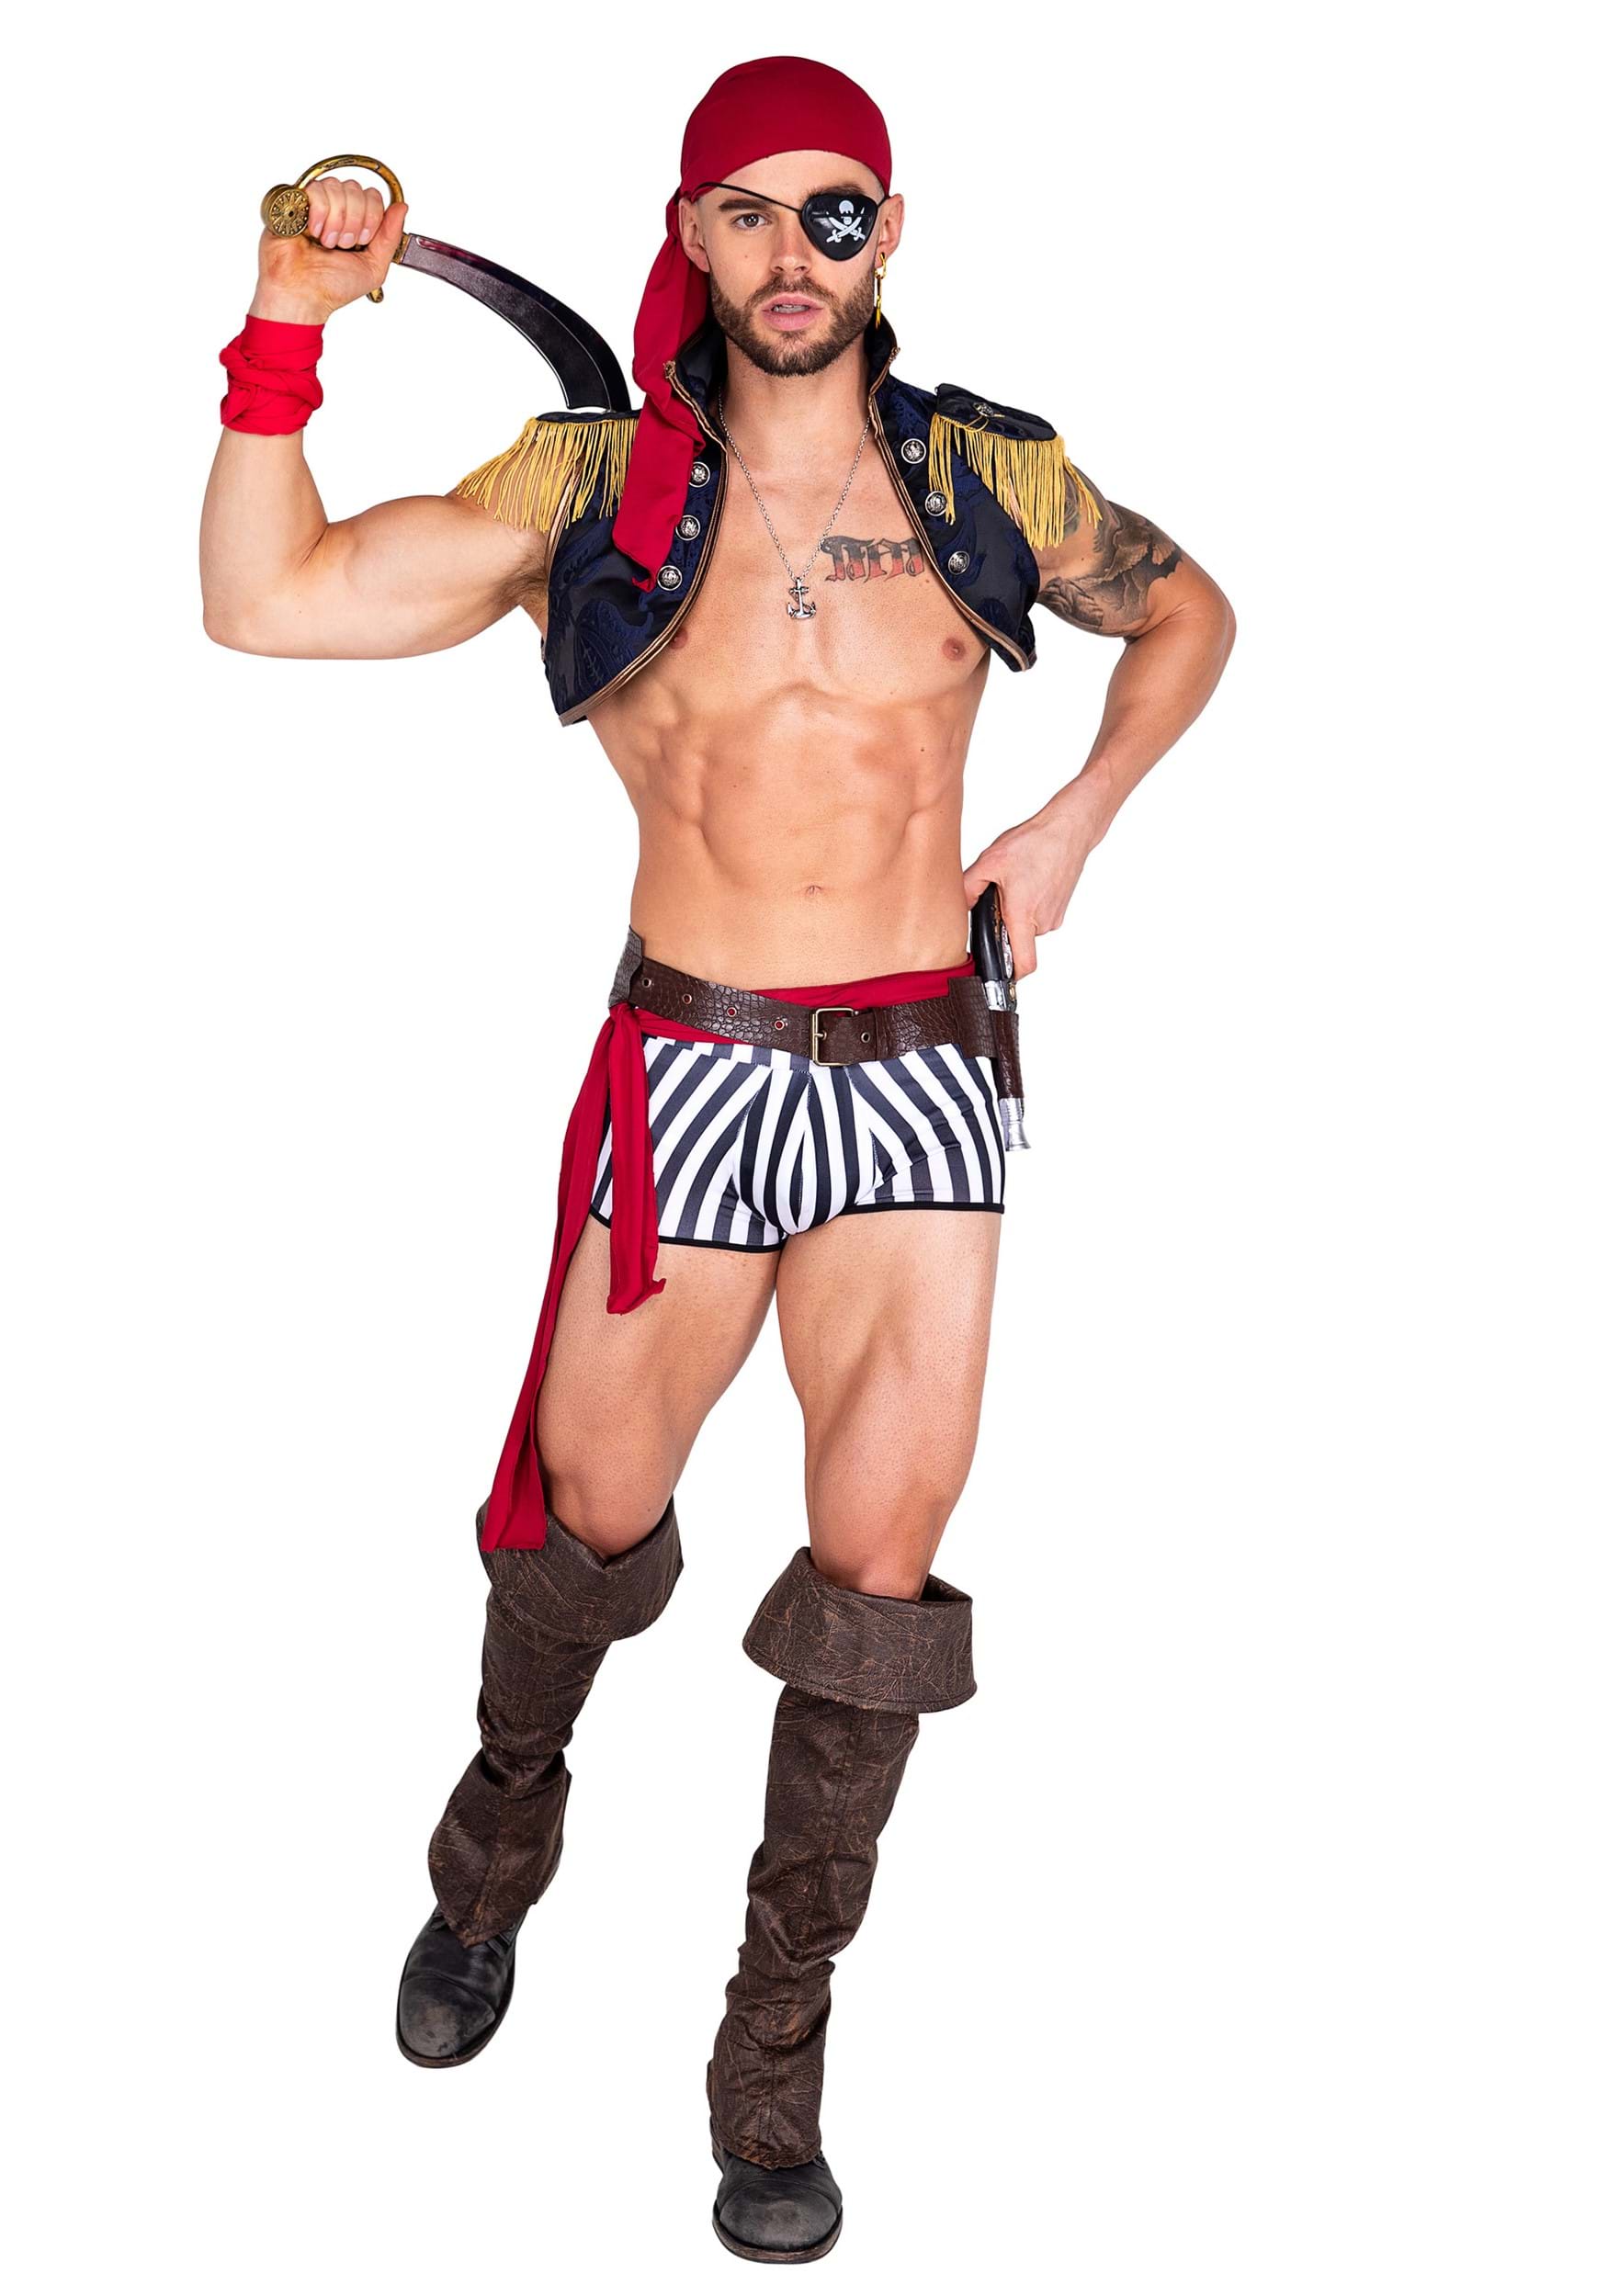 Most Revealing Halloween Costumes For Men